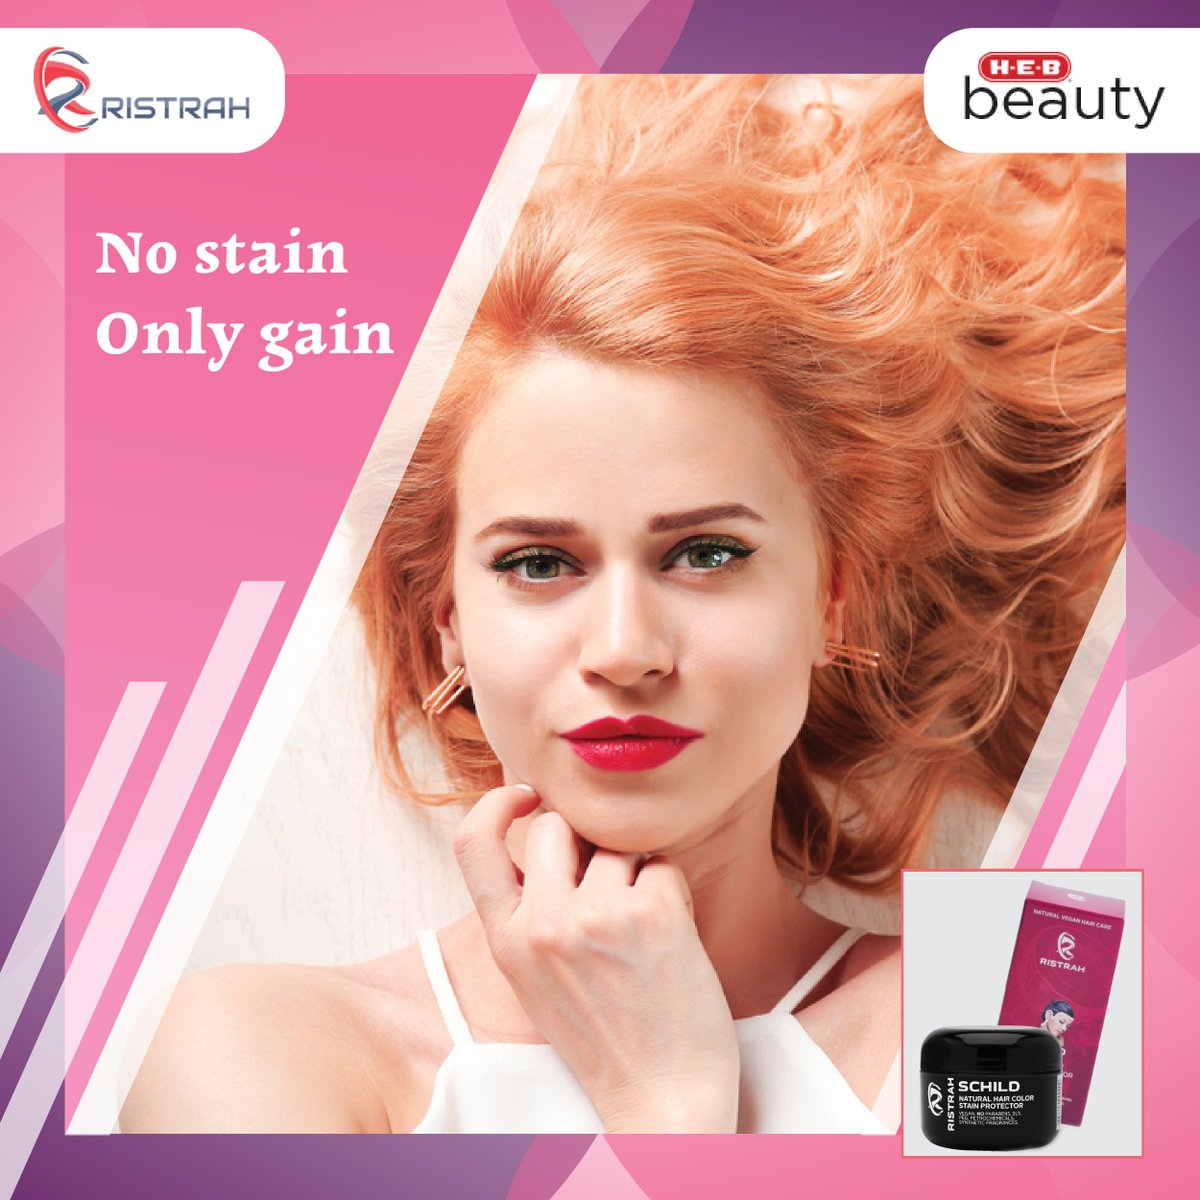 Make your hair coloring experience fun with Ristrah’s SCHILD Hair Color Stain Protector.
Know more about it here: bit.ly/2LUvd7g

#haircolor #haircolorideas #haircolors #haircoloring #haircolorexpert #haircolortrends #hairprotector #hairprotection #stainprotection